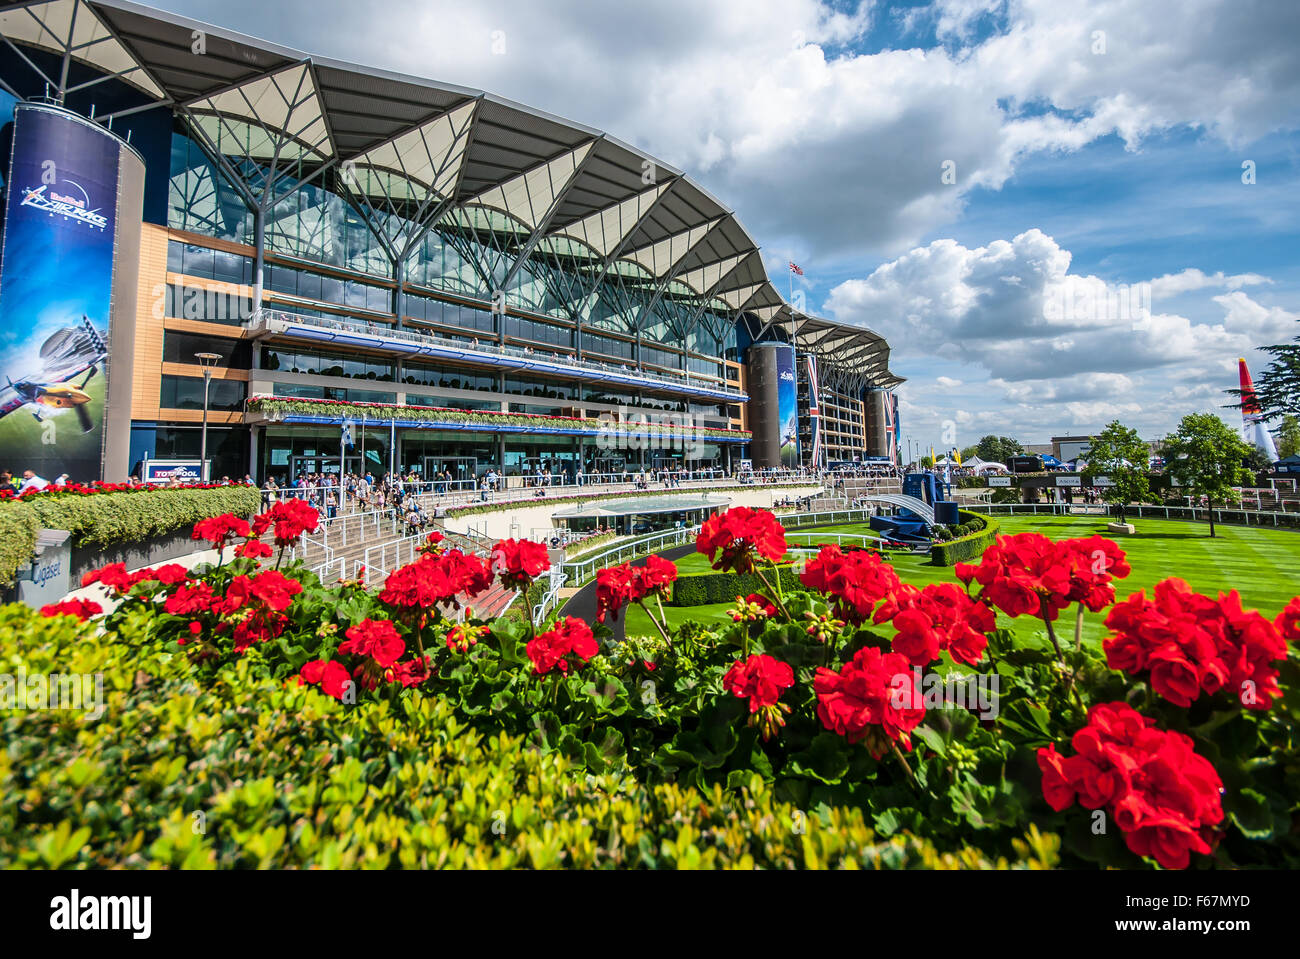 Ascot Racecourse is a British racecourse, located in Ascot, Royal Berkshire, England, UK which is used for thoroughbred horse racing. Flower display Stock Photo